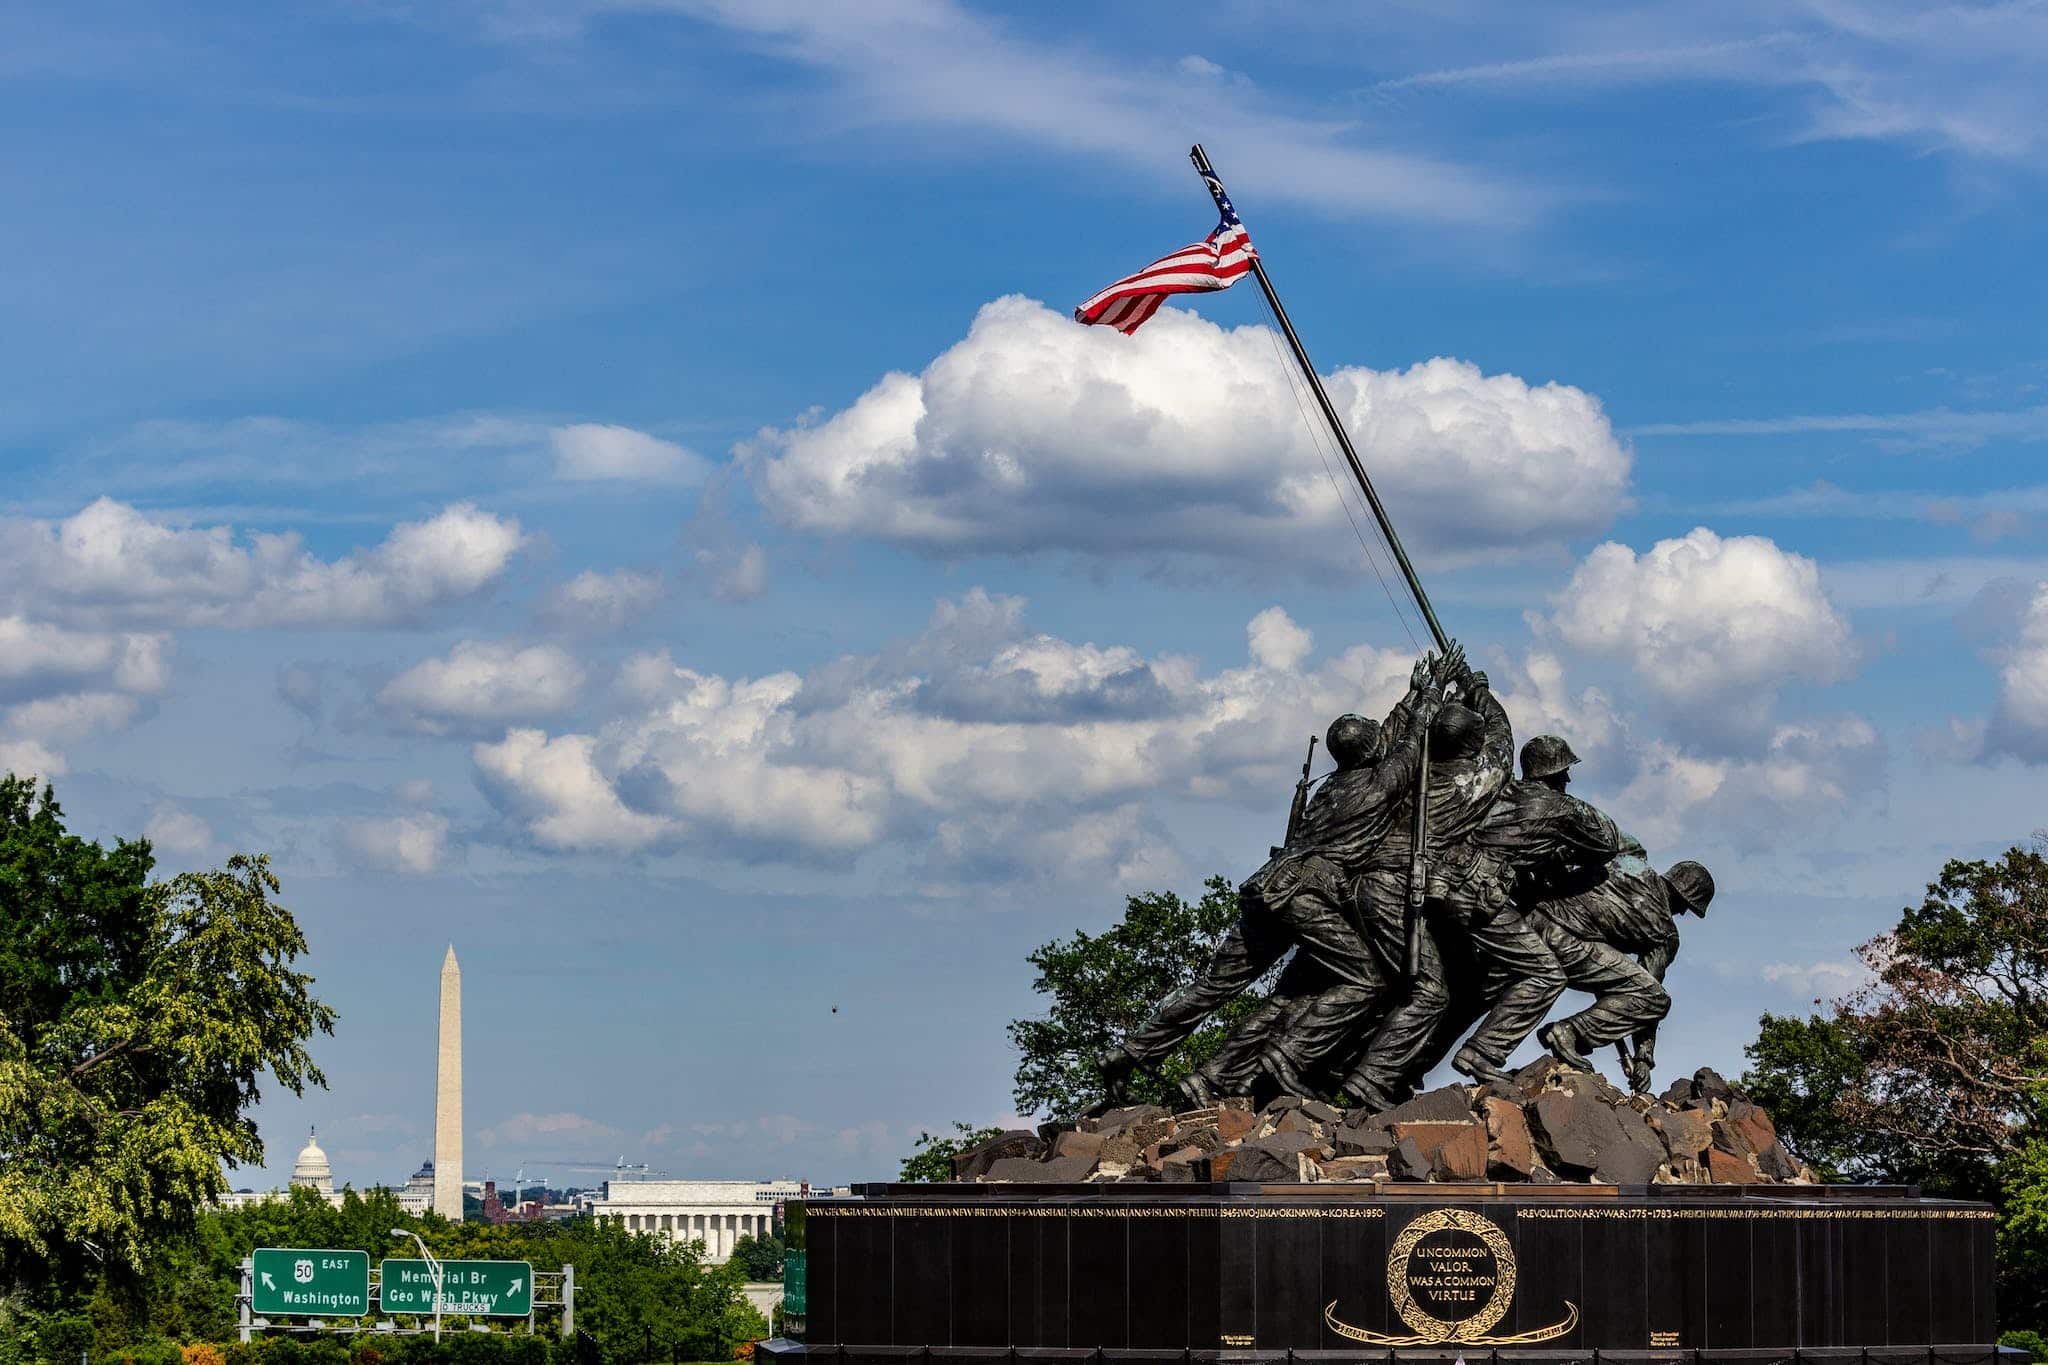 The United States Marine Corps War Memorial in virginia